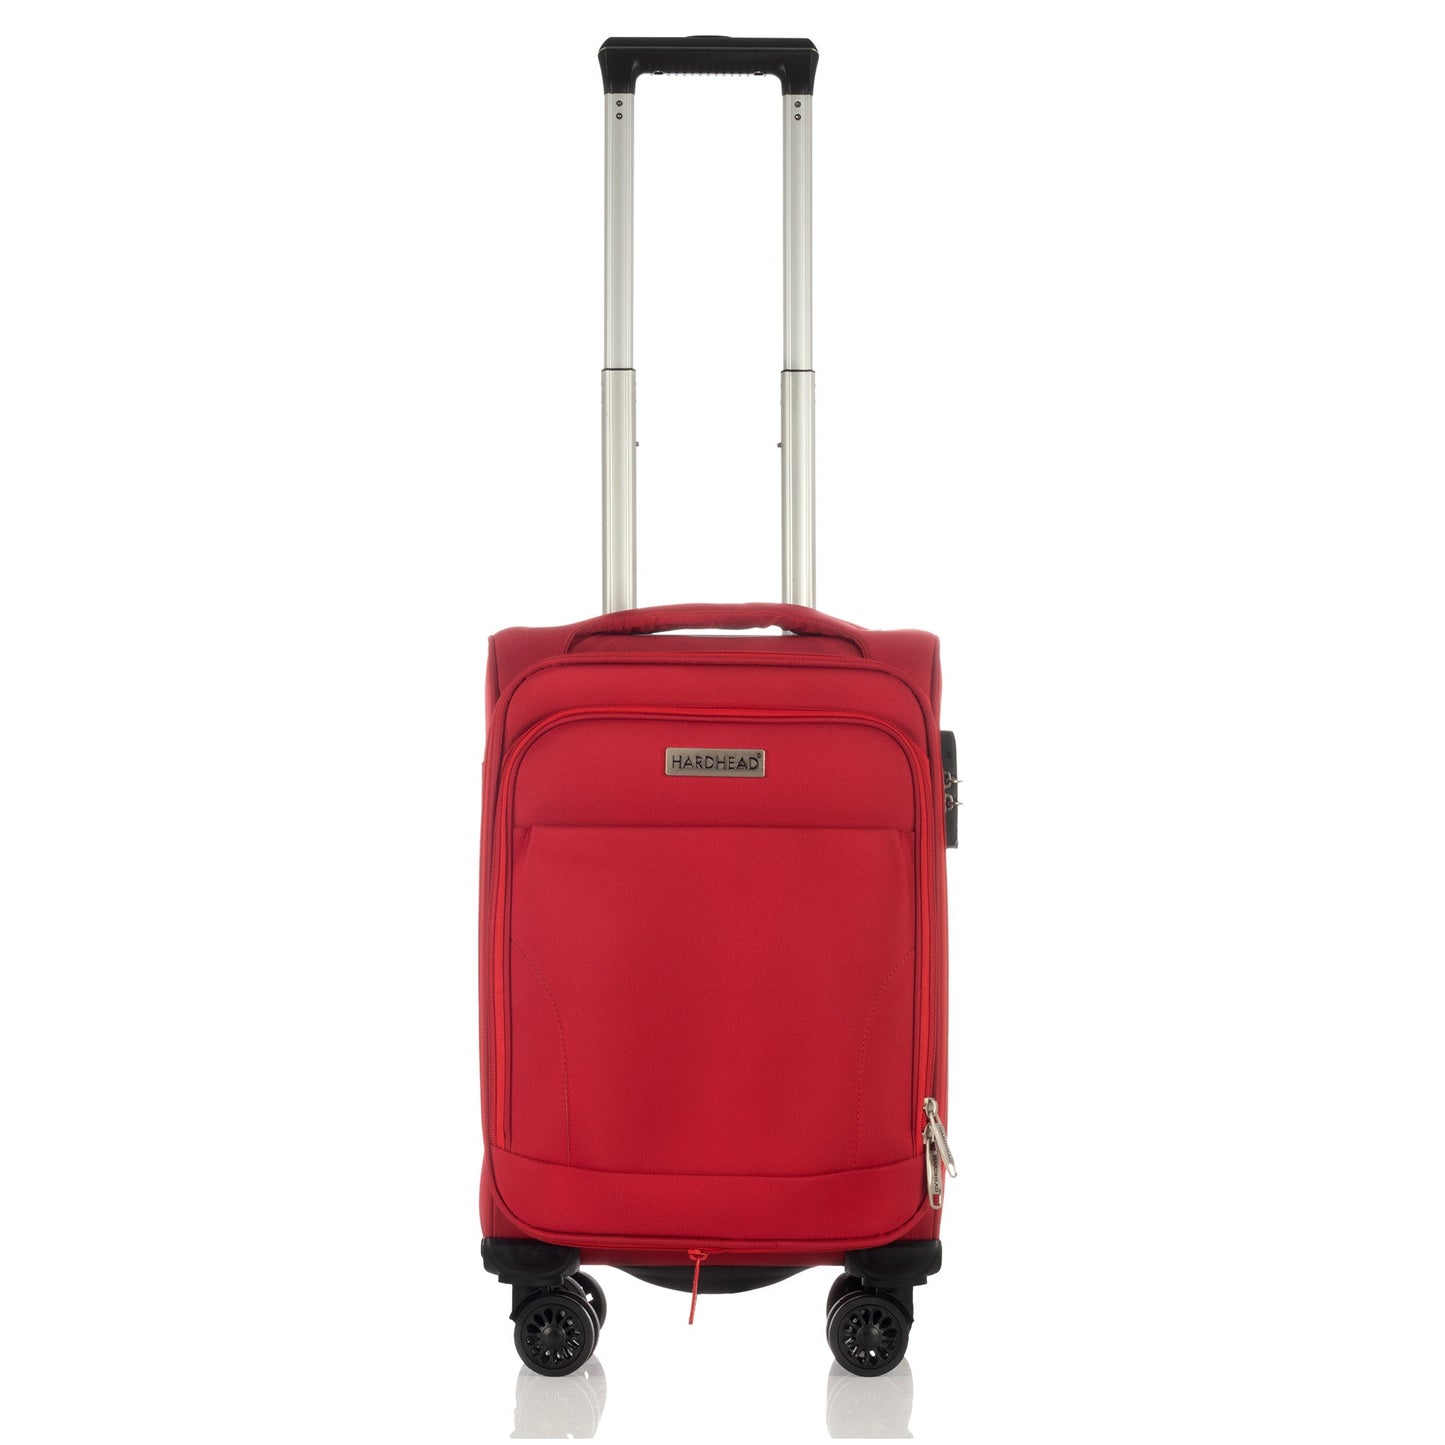 In Heaven Collection Red Luggage (18/20/26/30") Suitcase Lock Spinner Soft